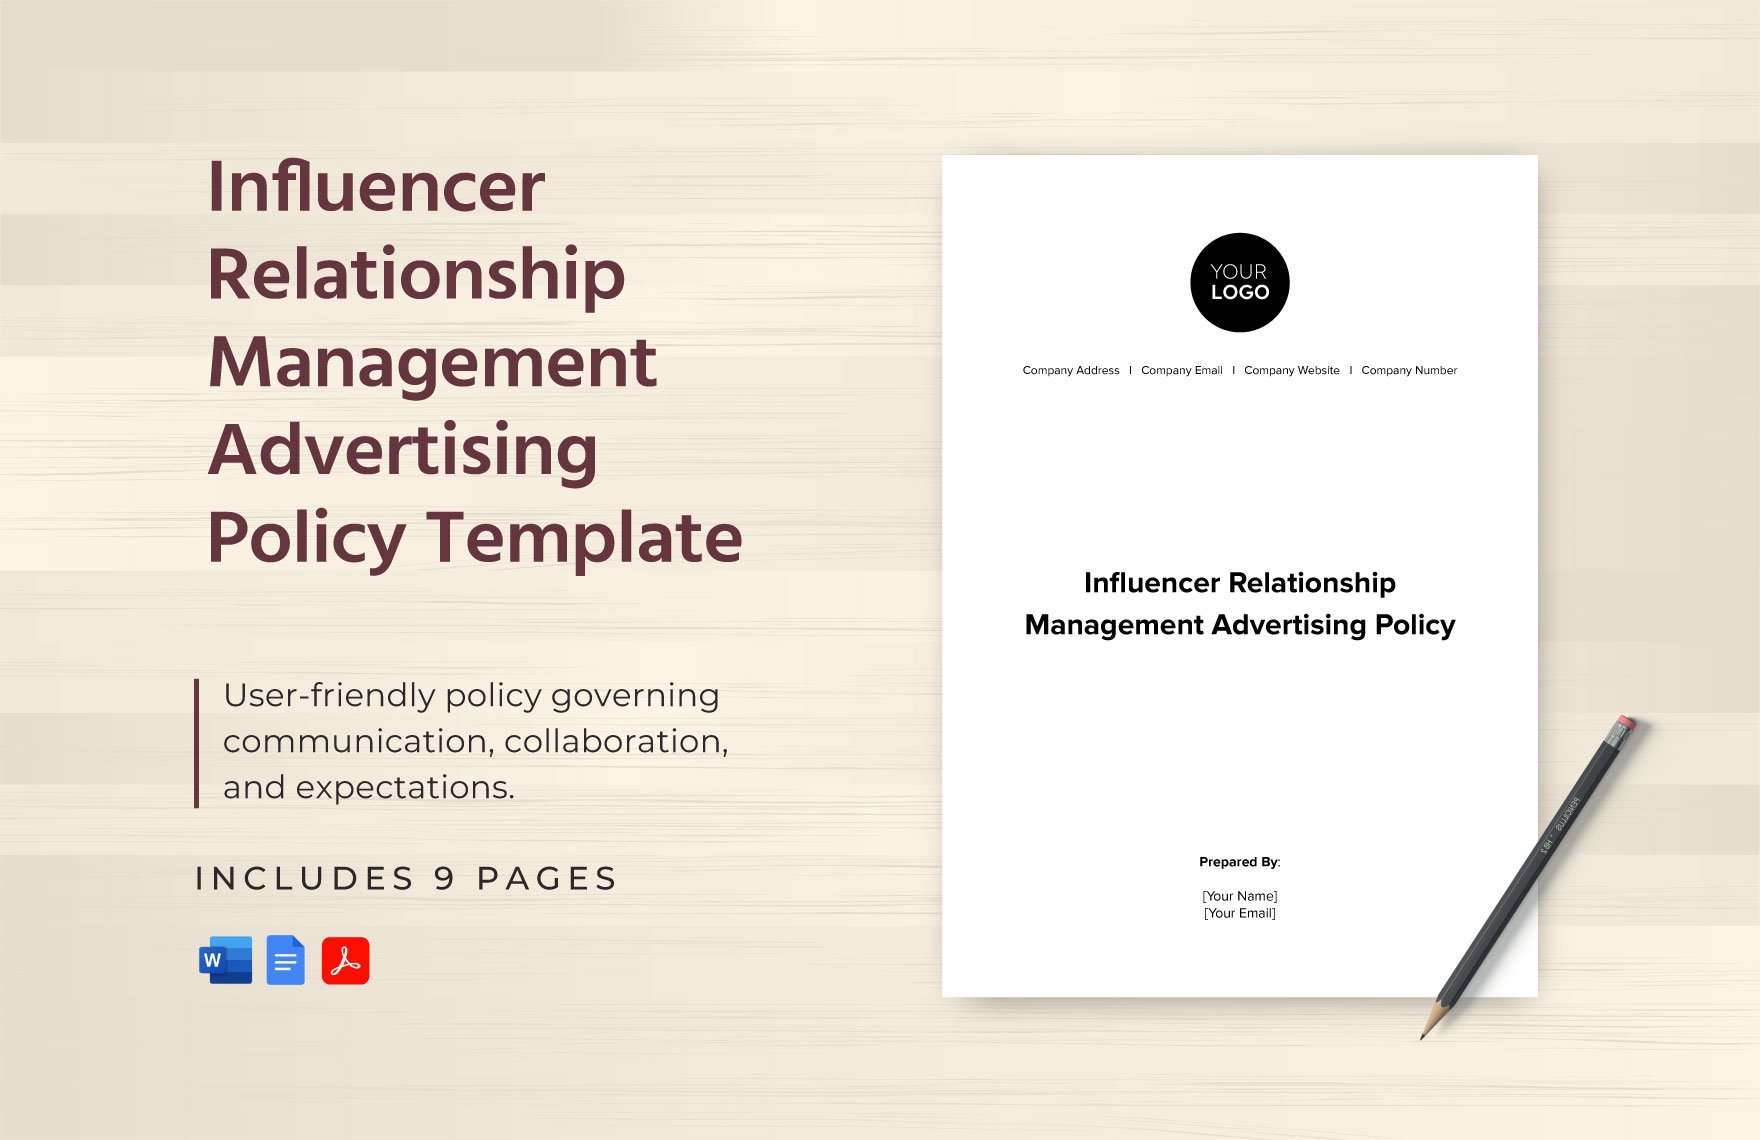 Influencer Relationship Management Advertising Policy Template